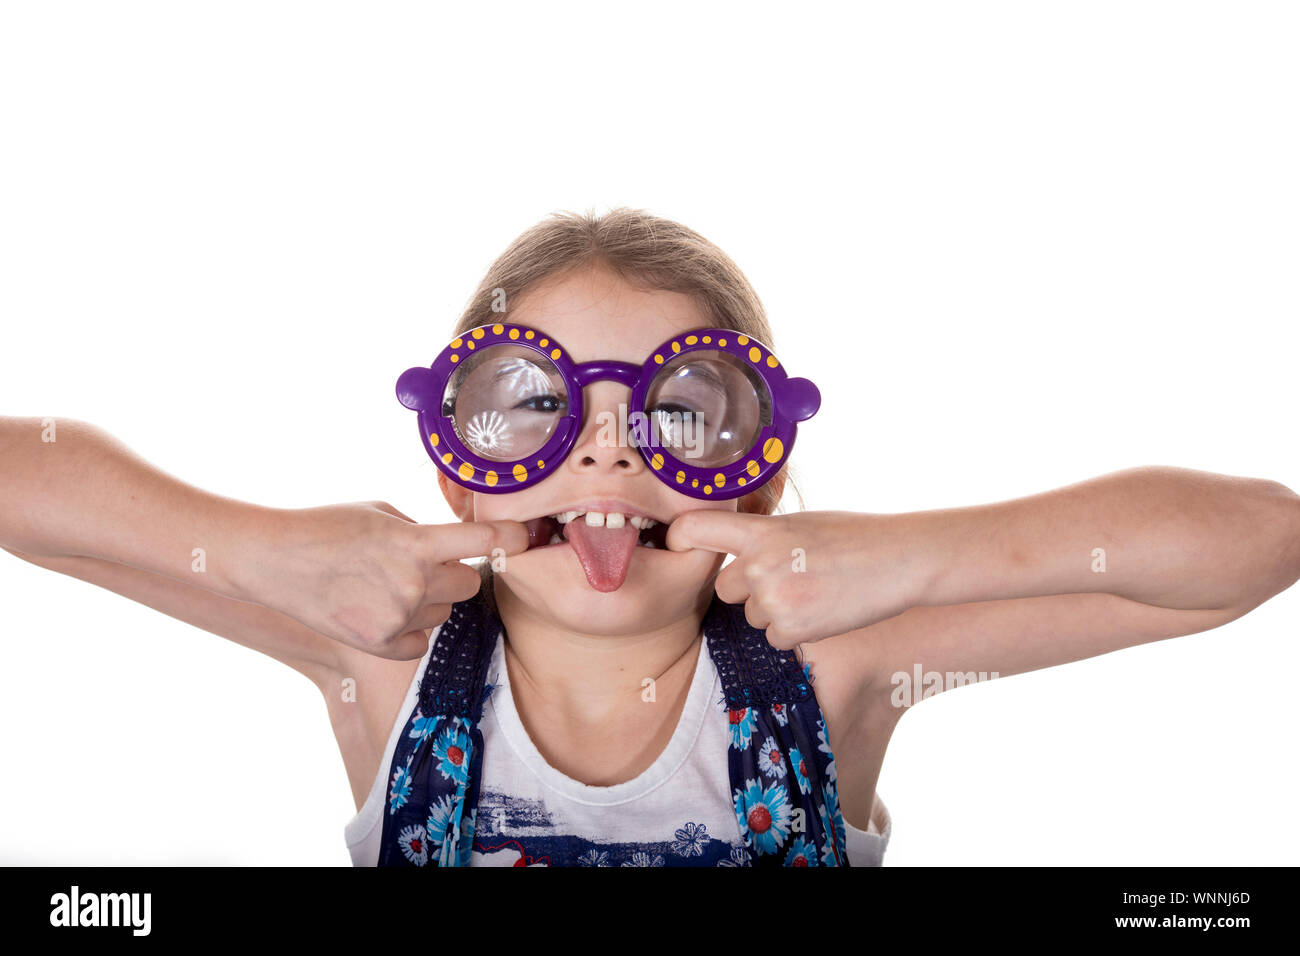 Little girl with silly glasses on making a face and sticking out tongue. Stock Photo